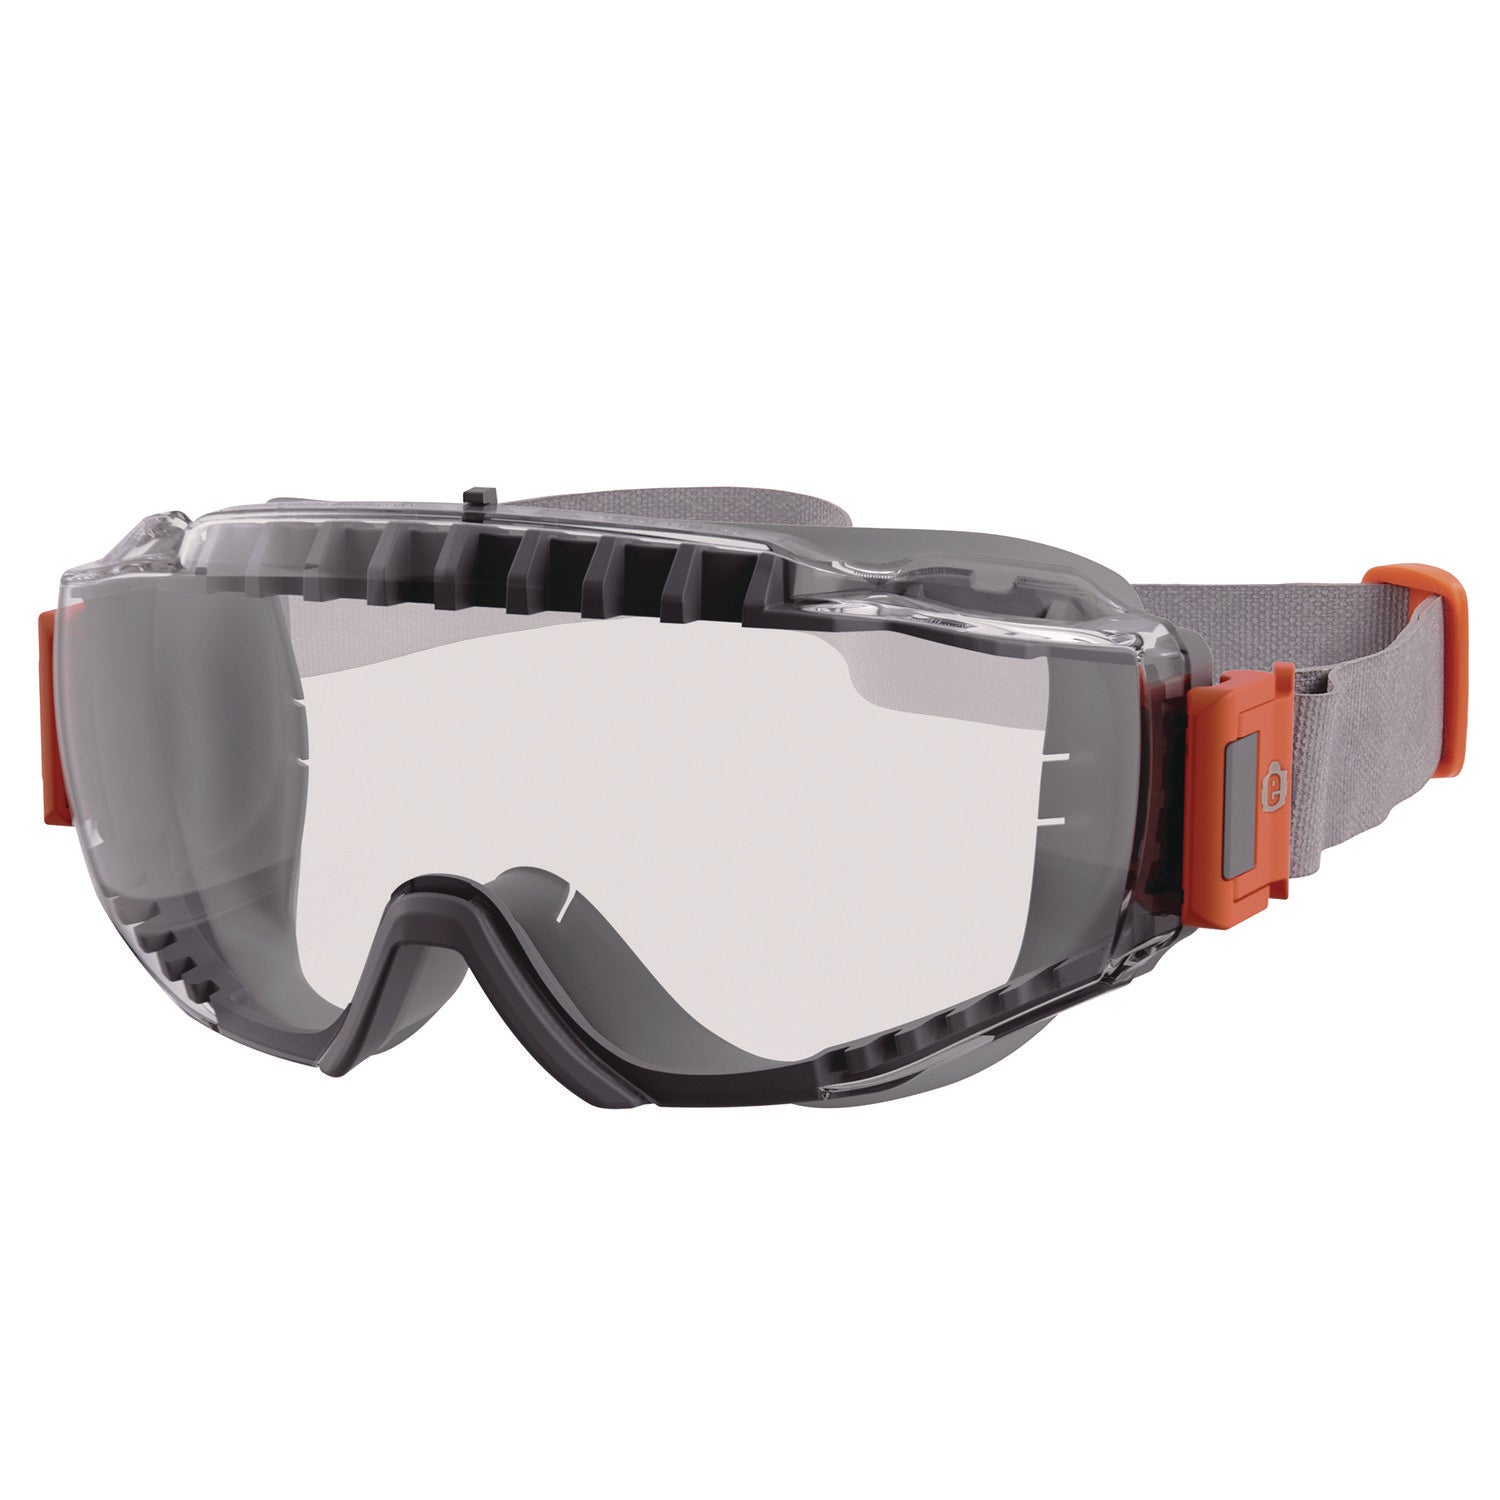 skullerz-modi-otg-anti-scratch-and-enhanced-anti-fog-safety-goggles-with-neoprene-strap-clear-lens-ships-in-1-3-bus-days_ego60302 - 1